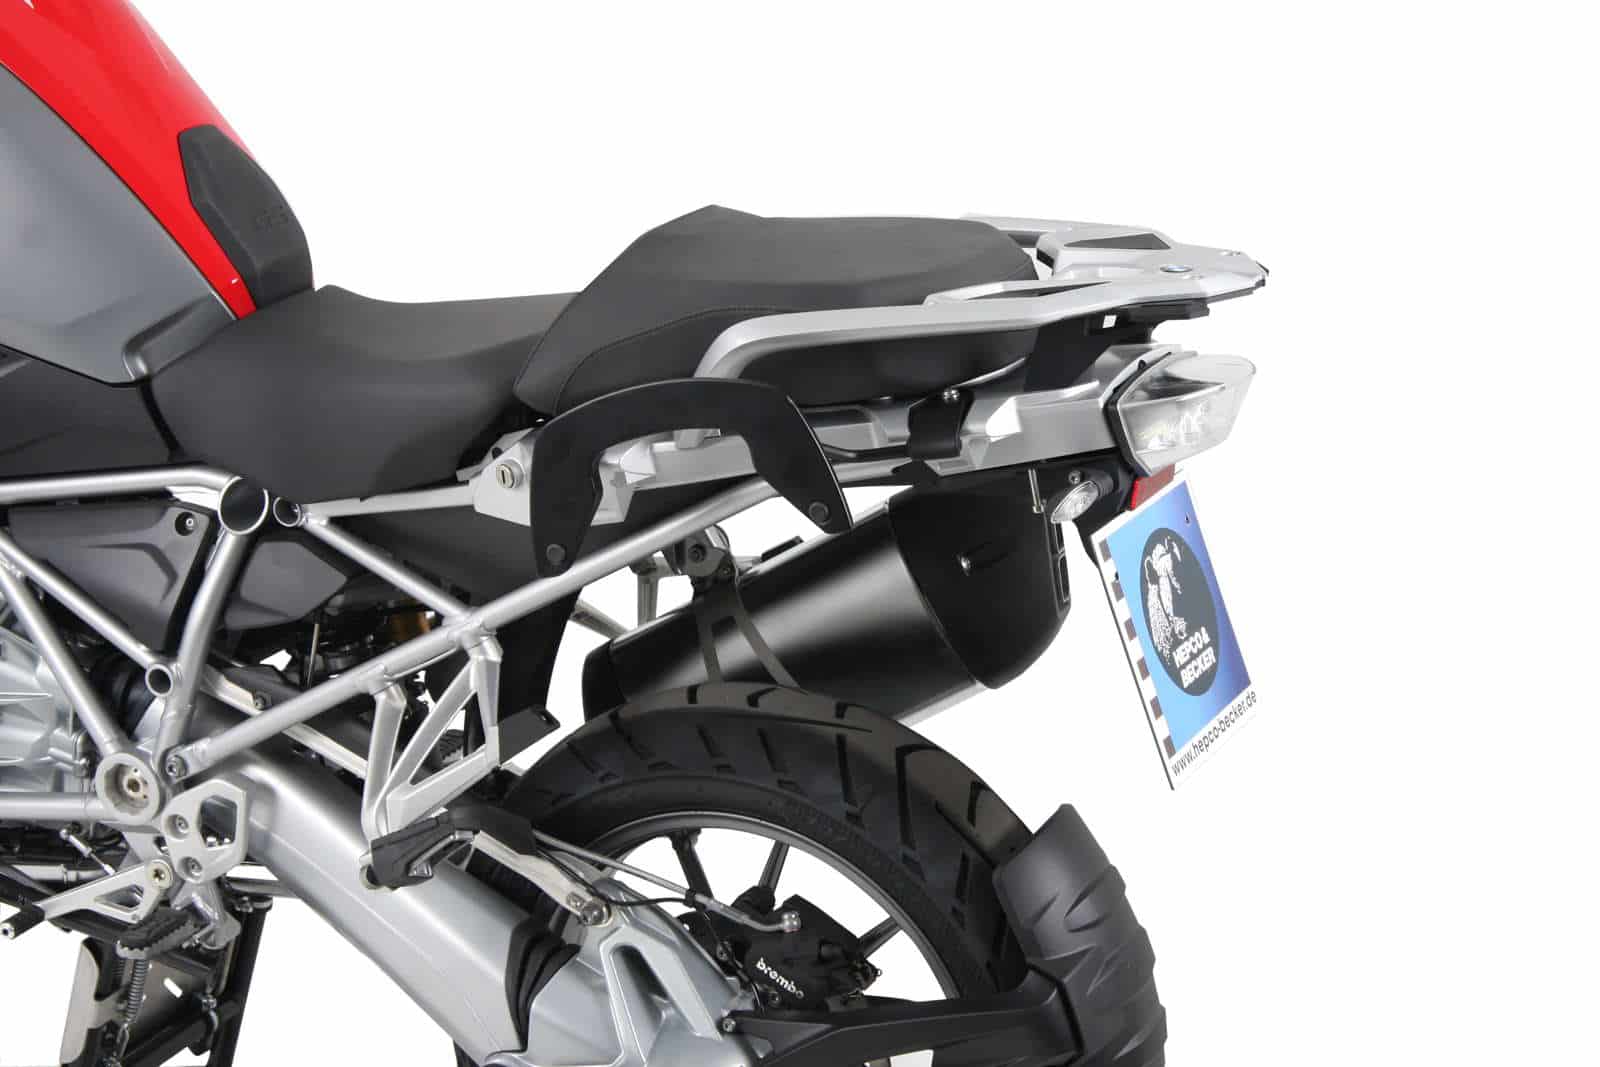 C-Bow sidecarrier for BMW R 1200 GS LC (2013-2018)